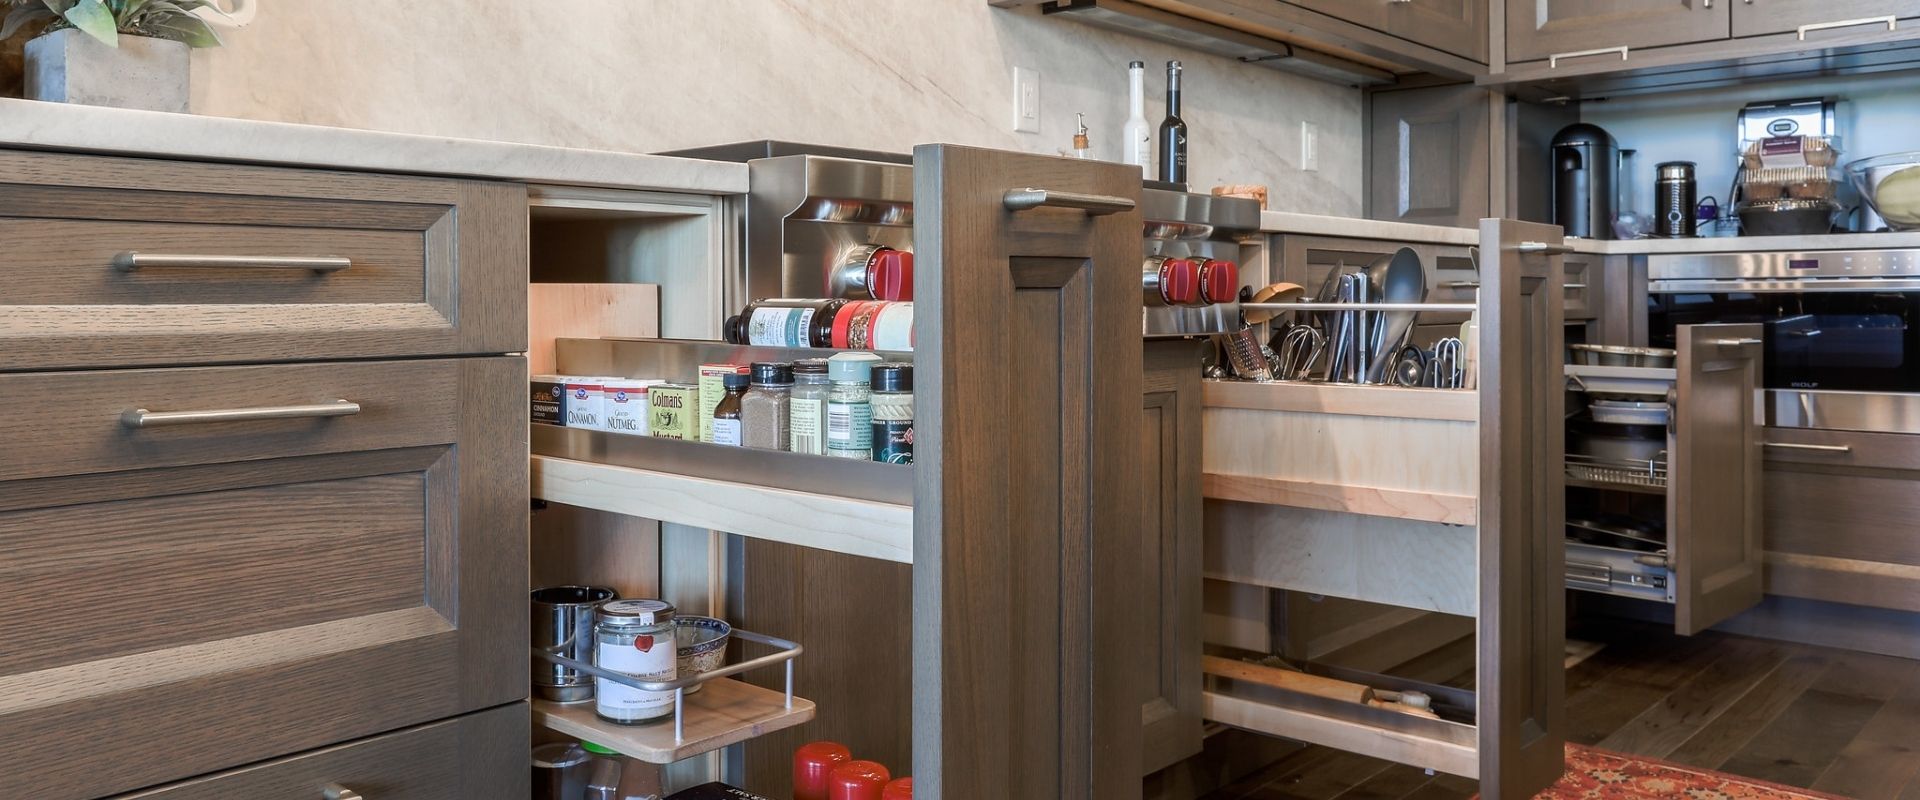 kitchen cabinets with spice rack